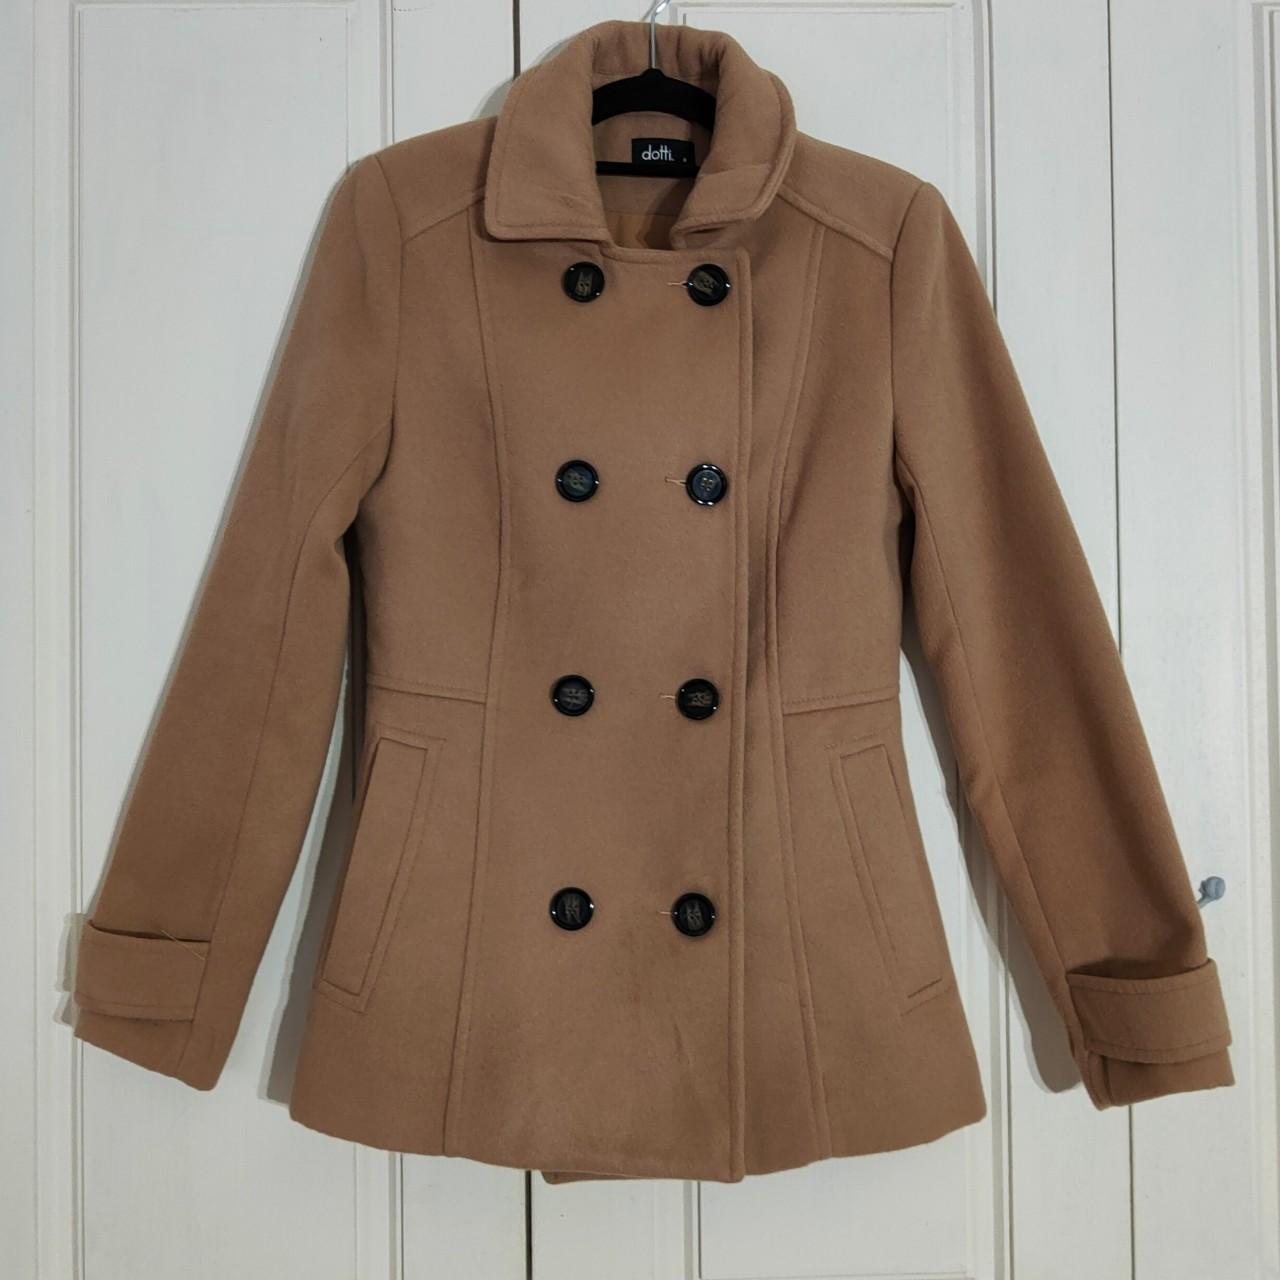 DOTTI TAILORED PEA COAT - SIZE 8 This beautifully... - Depop